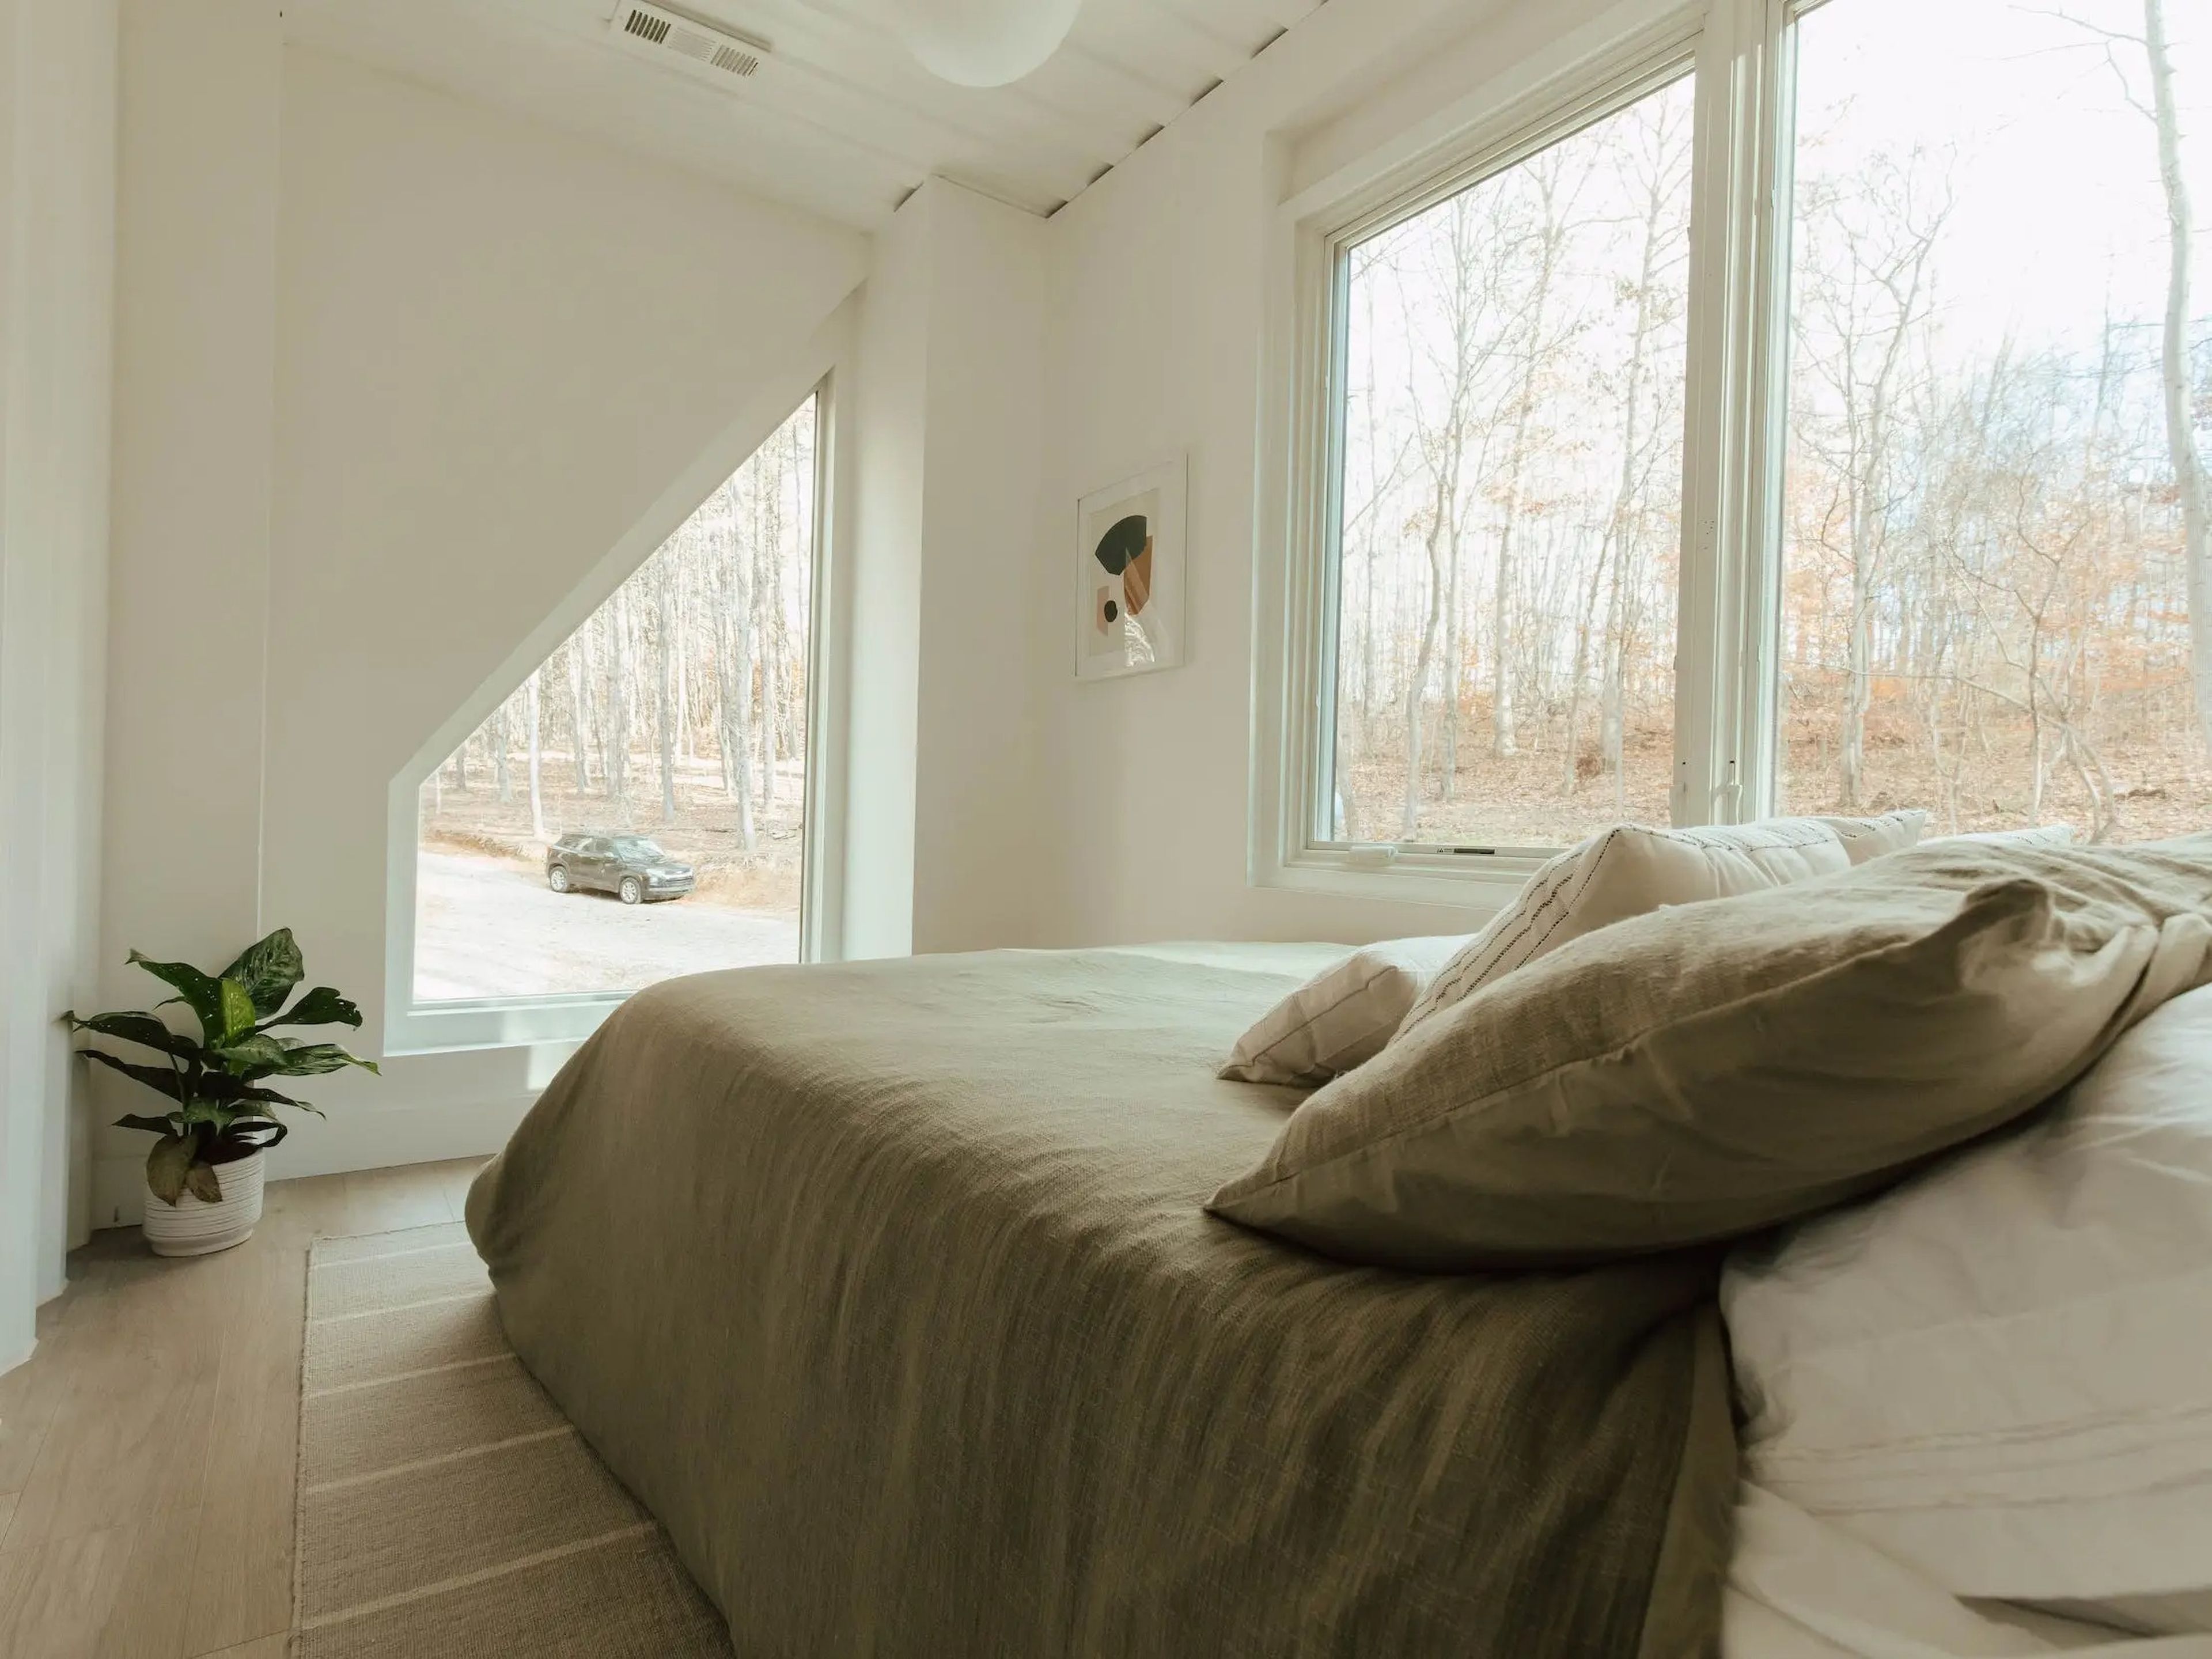 A bed inside a Hygge, a shipping container home.